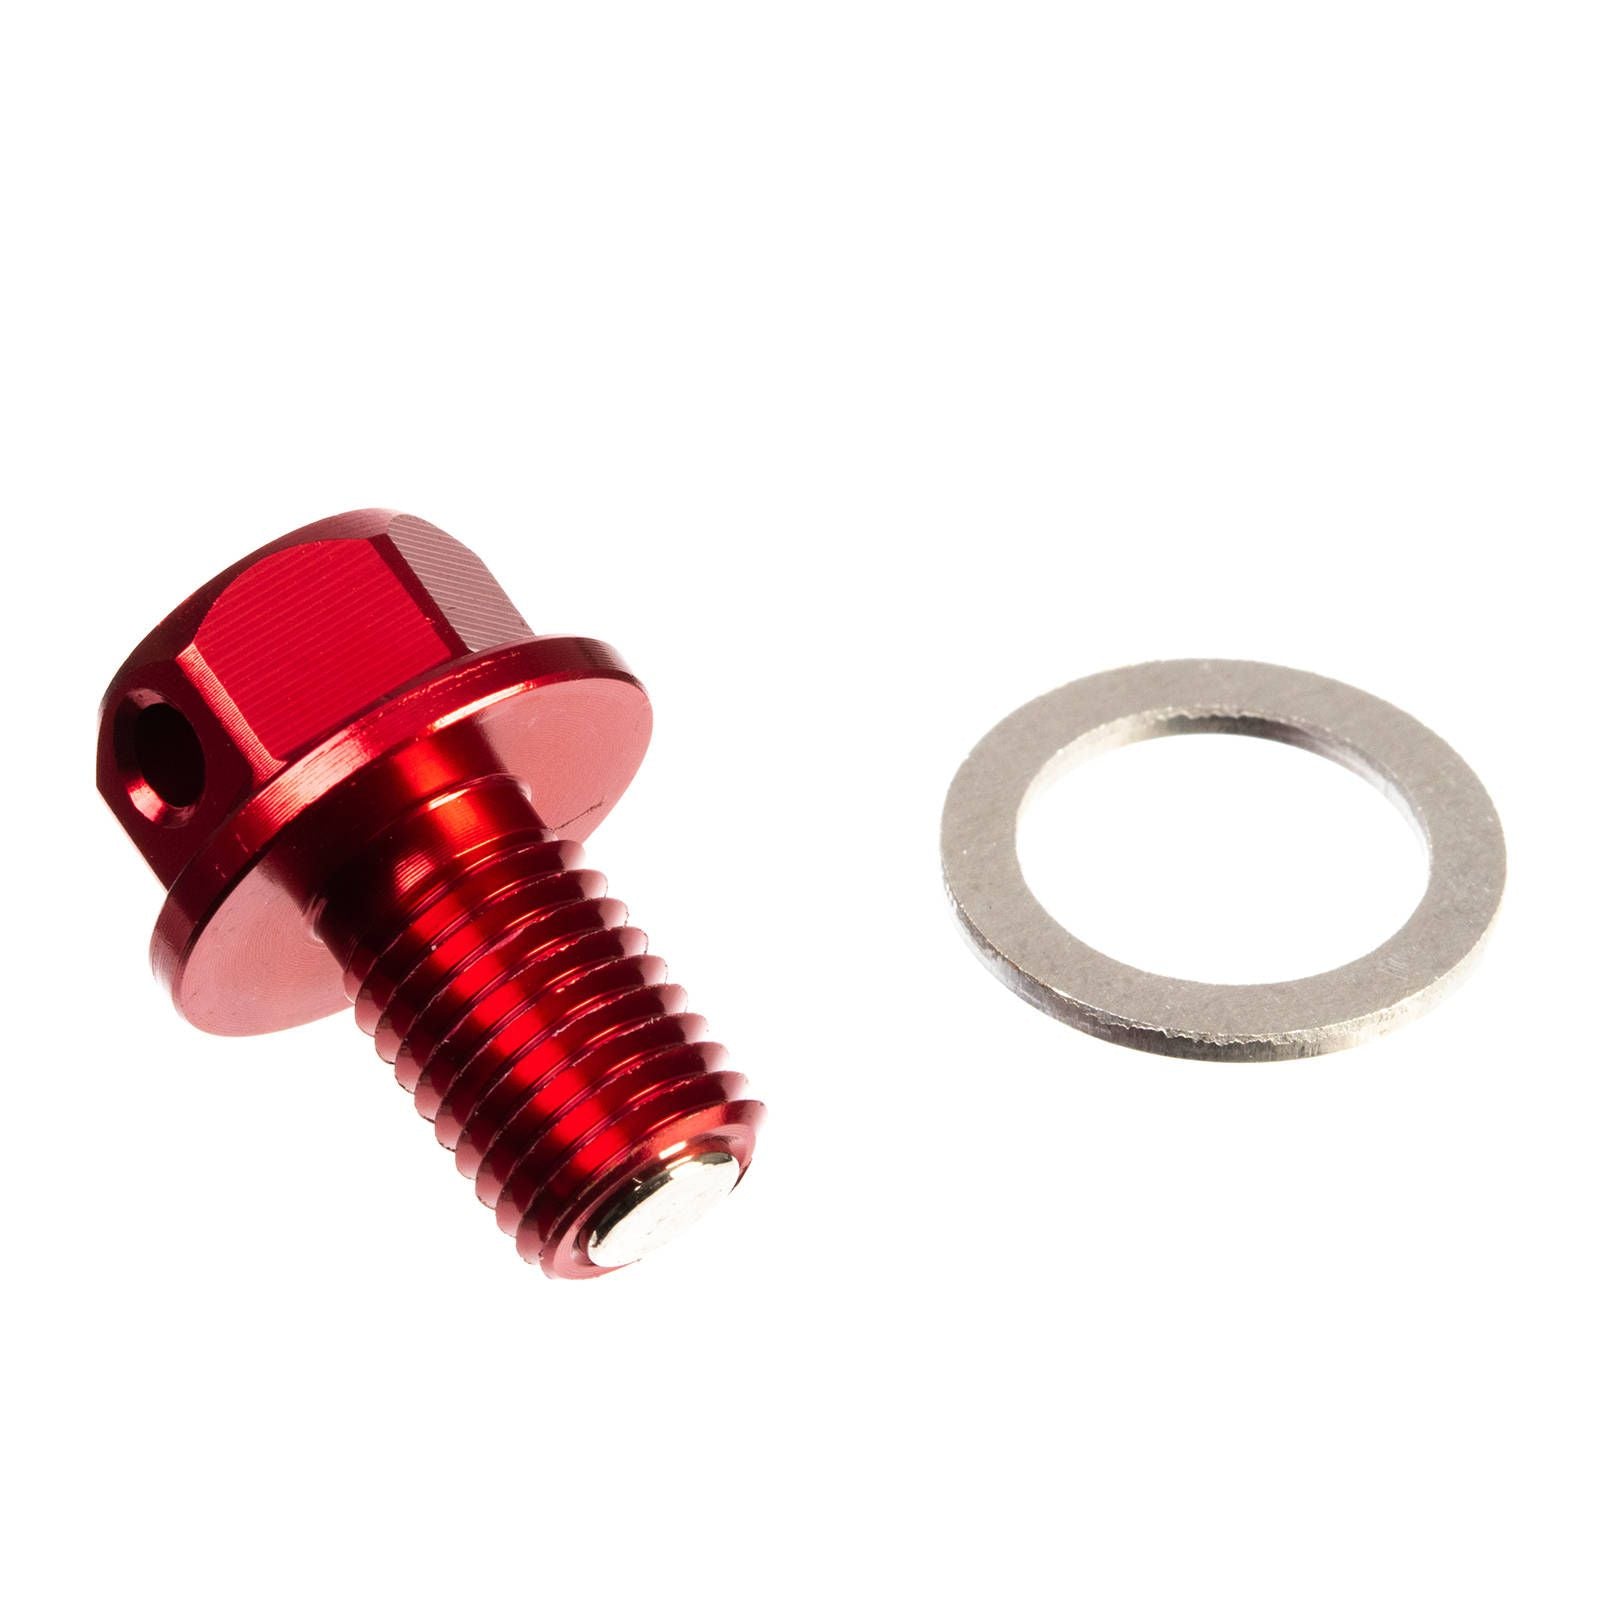 New WHITES Magnetic Sump Plug M10 x 15 x 1.25 - Red #WPMDP1015125R